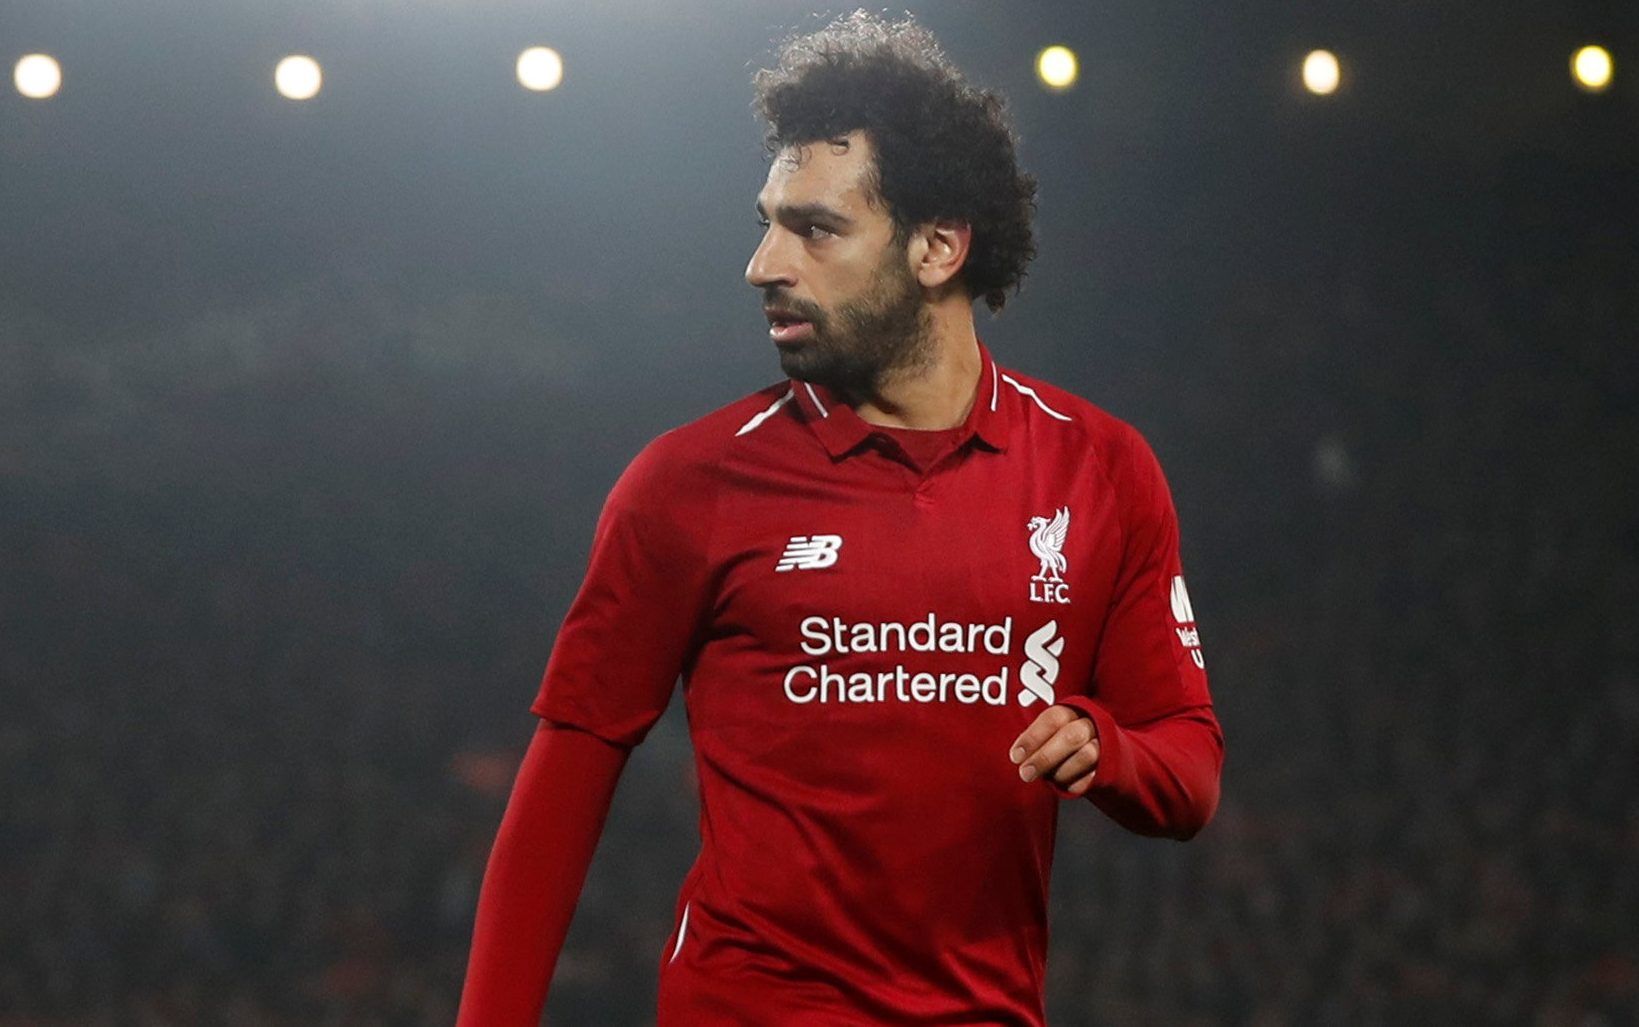 Soccer Football - Premier League - Liverpool v Newcastle United - Anfield, Liverpool, Britain - December 26, 2018  Liverpool's Mohamed Salah during the match   Action Images via Reuters/Lee Smith  EDITORIAL USE ONLY. No use with unauthorized audio, video, data, fixture lists, club/league logos or 